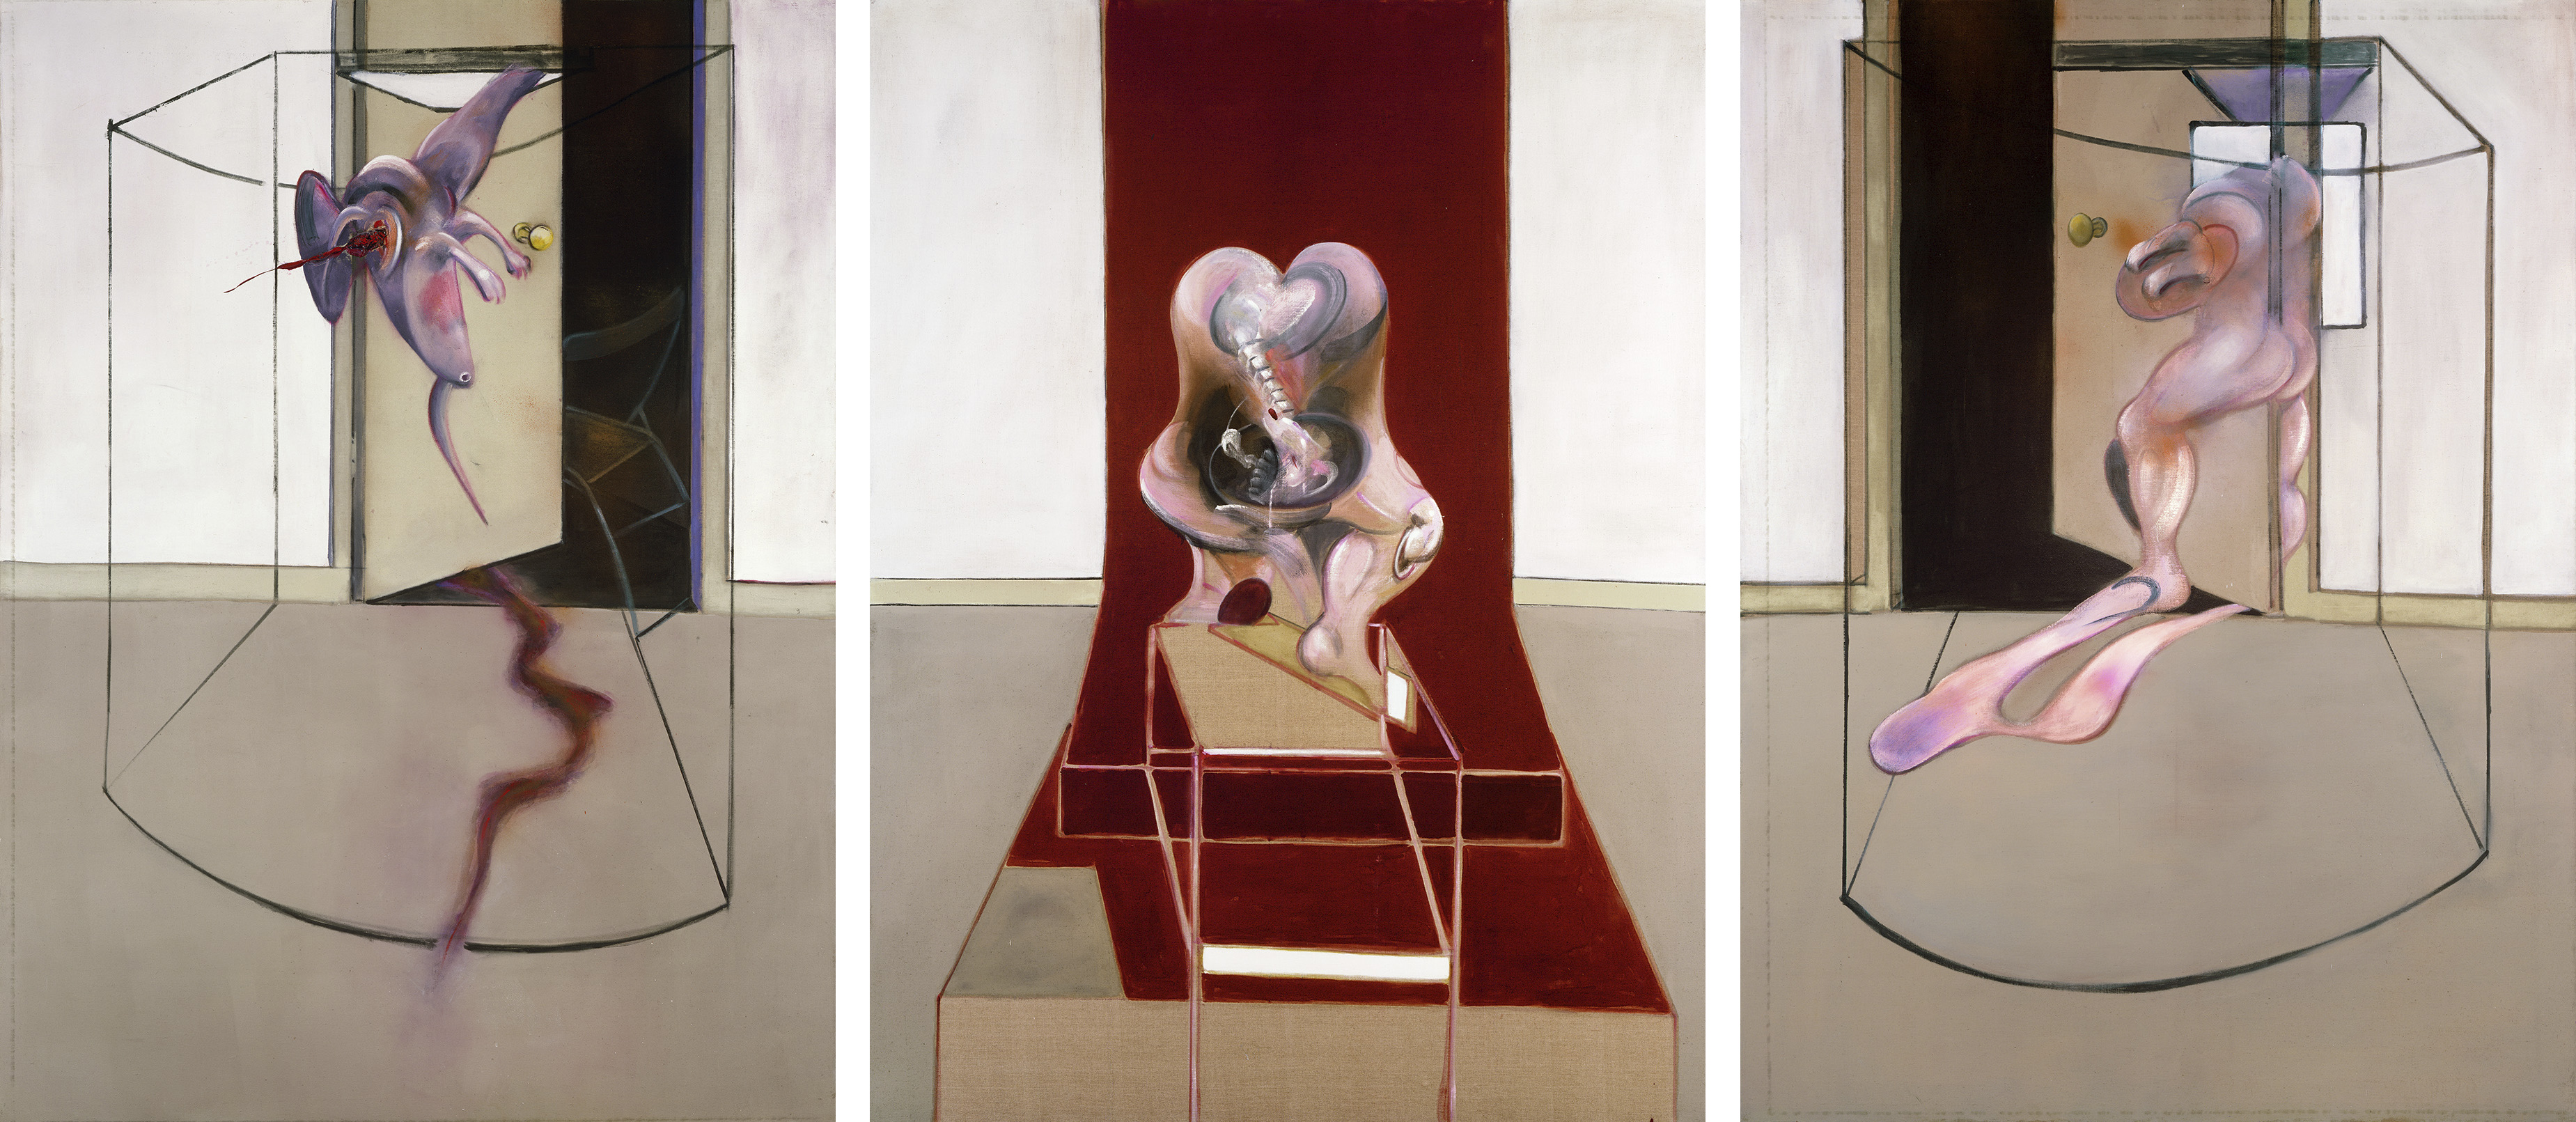 Francis Bacon, TRIPTYCH INSPIRED BY THE ORESTEIA OF AESCHYLUS, 1981